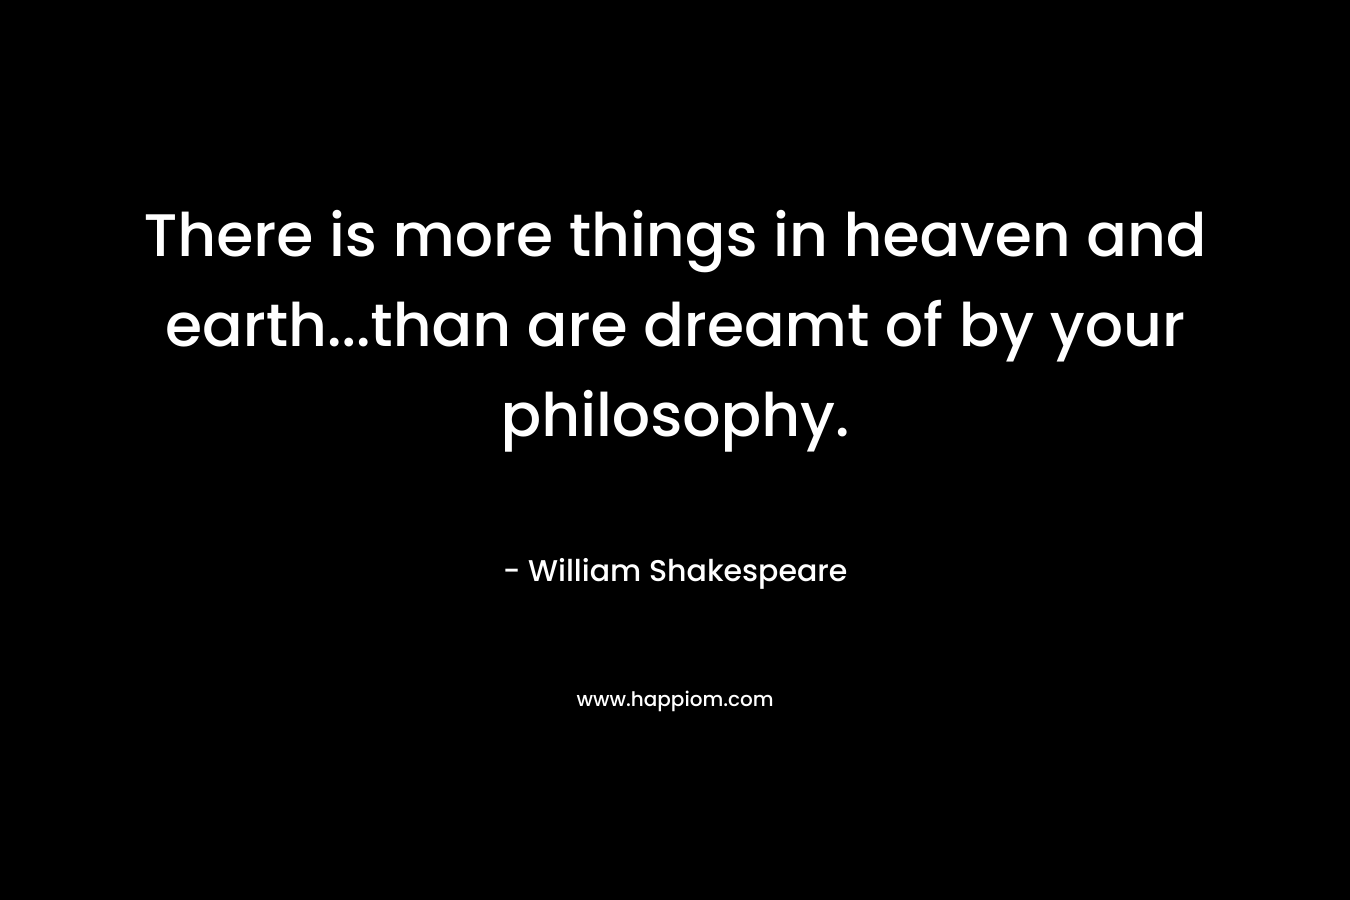 There is more things in heaven and earth...than are dreamt of by your philosophy.